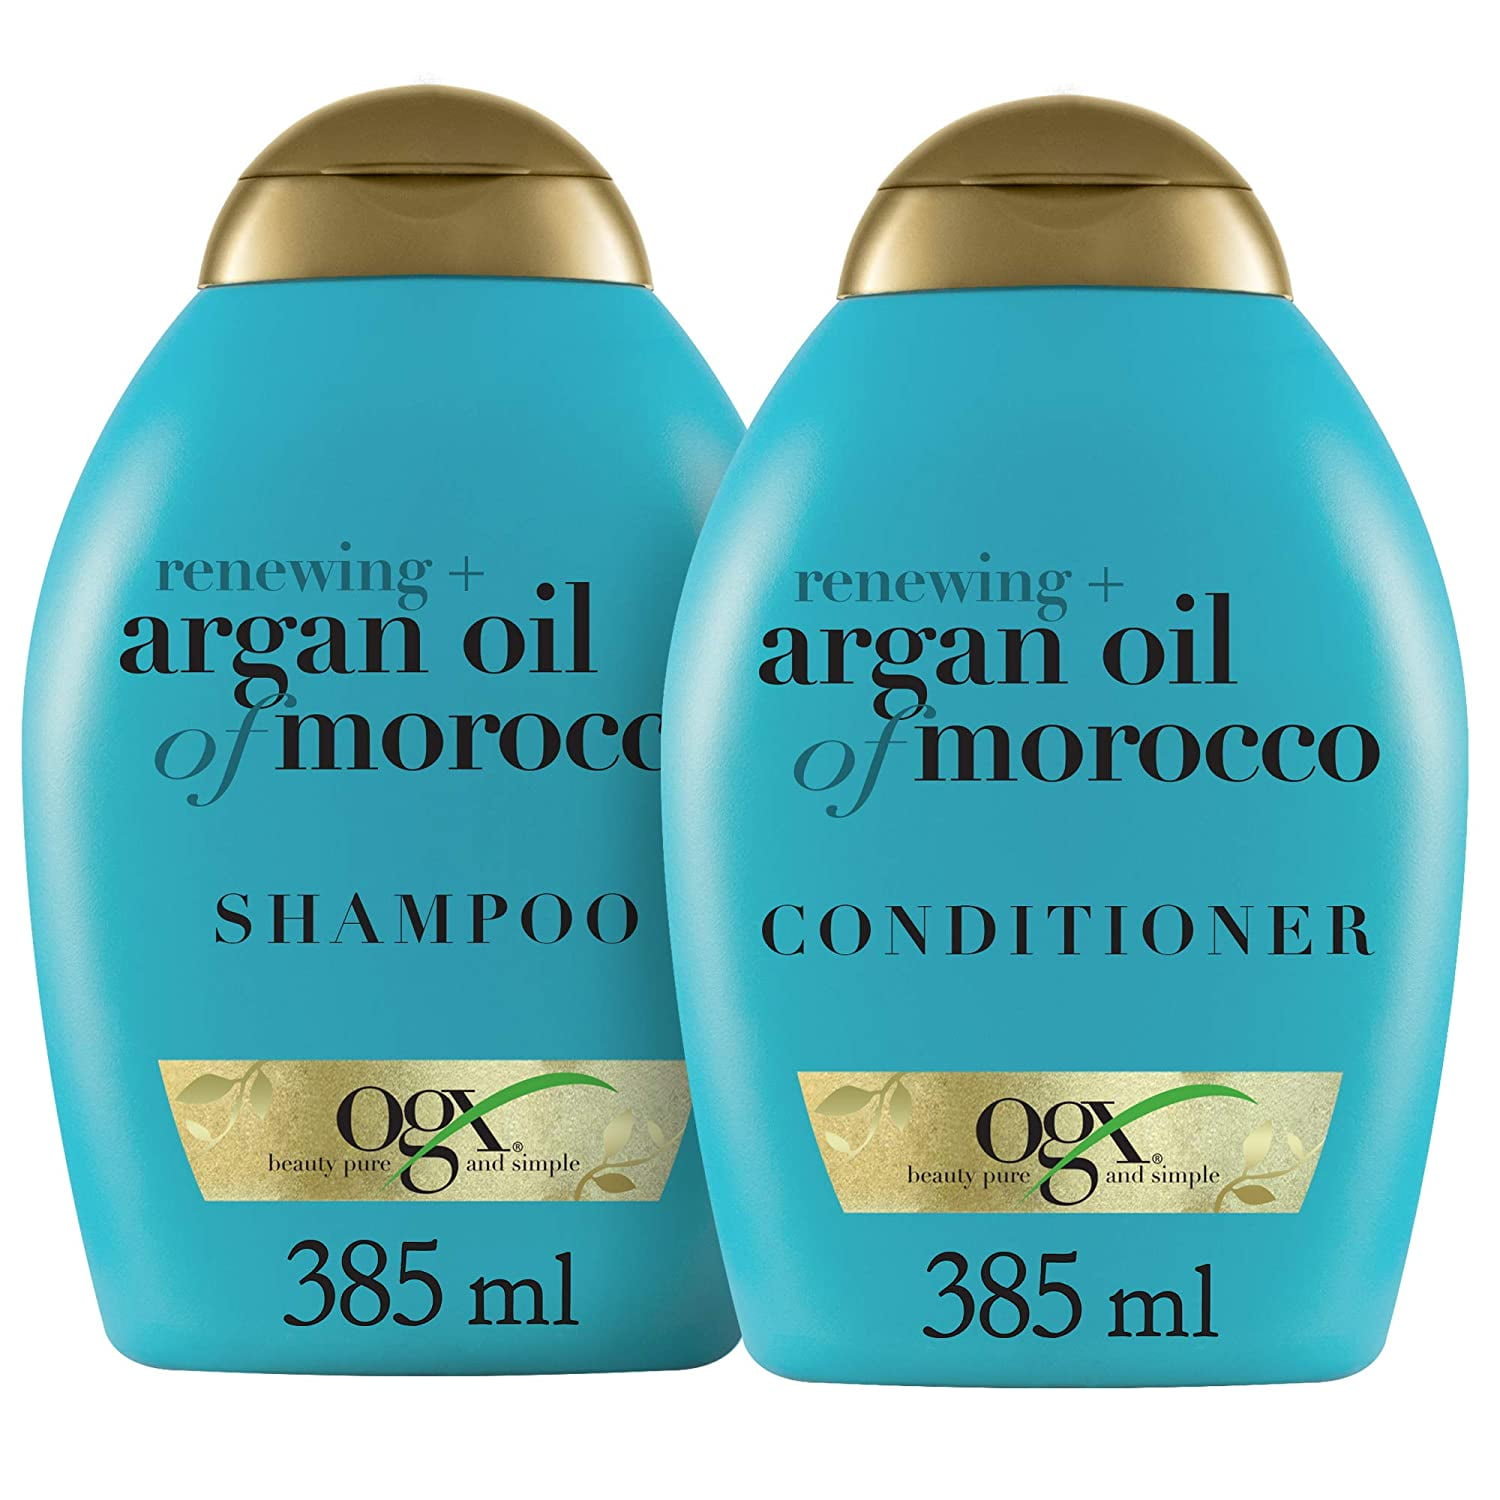 reaktion Fancy Følg os OGX Renewing + Argan Oil of Morocco Shampoo & Conditioner Set, 13 Ounce  (packaging may vary), Blue - Walmart.com